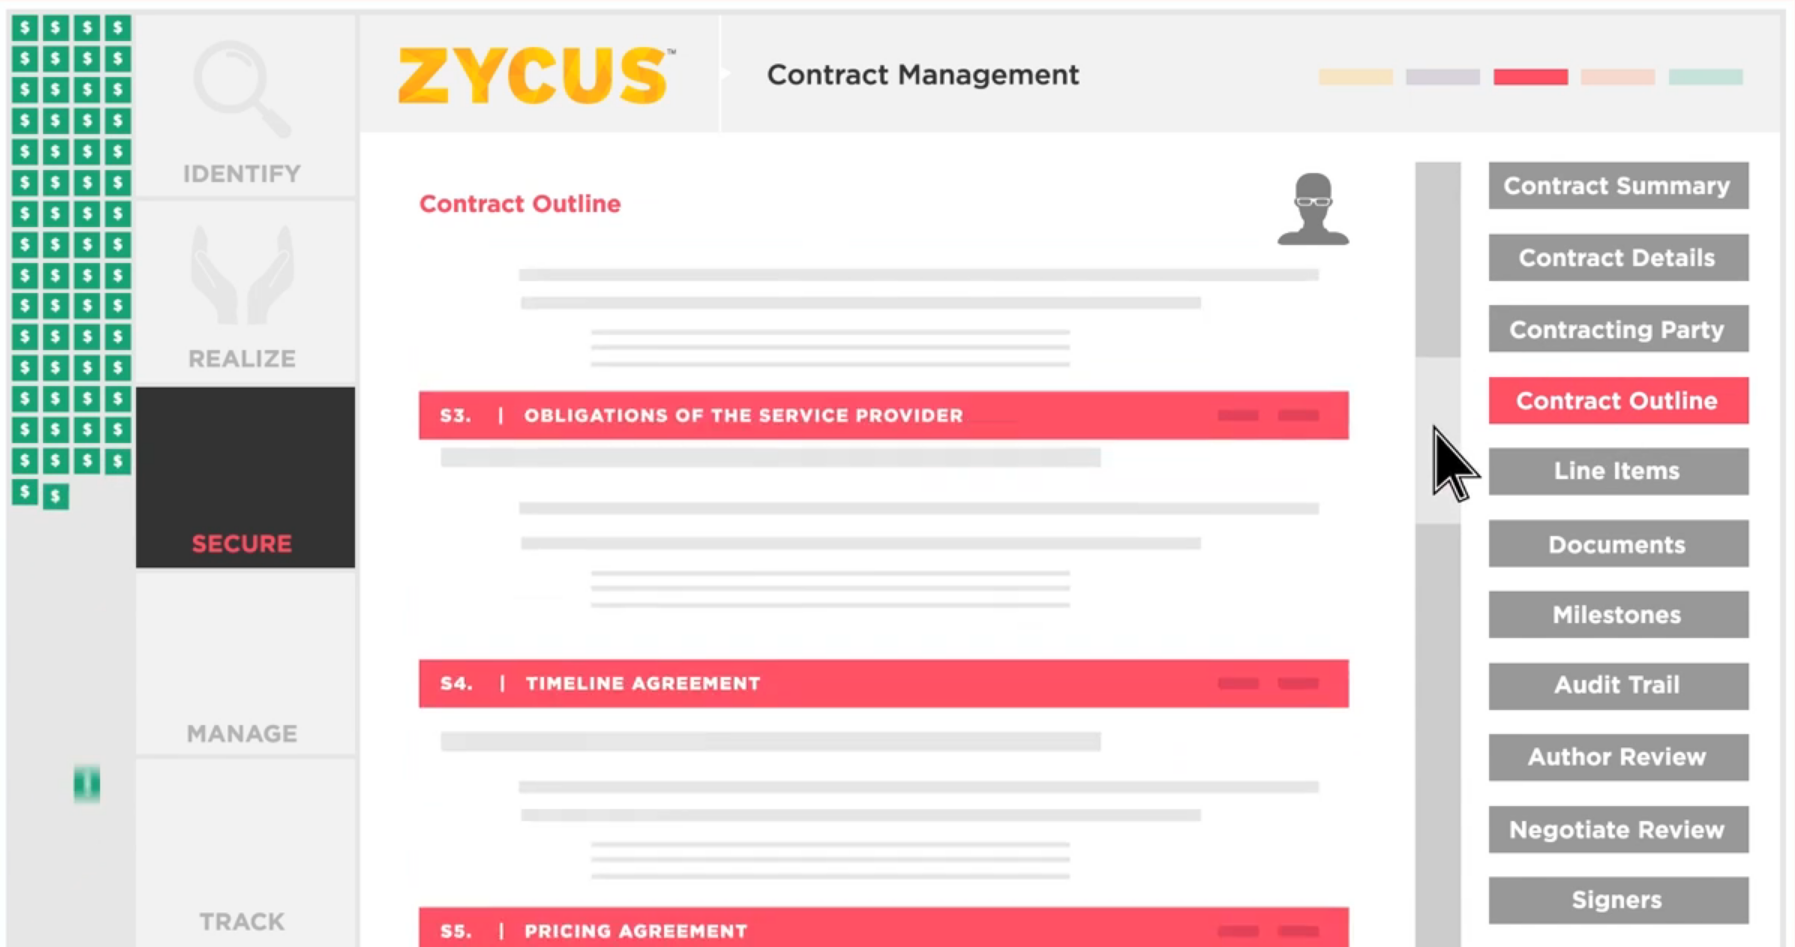 Zycus Procure-to-Pay Solution Software - Contract management